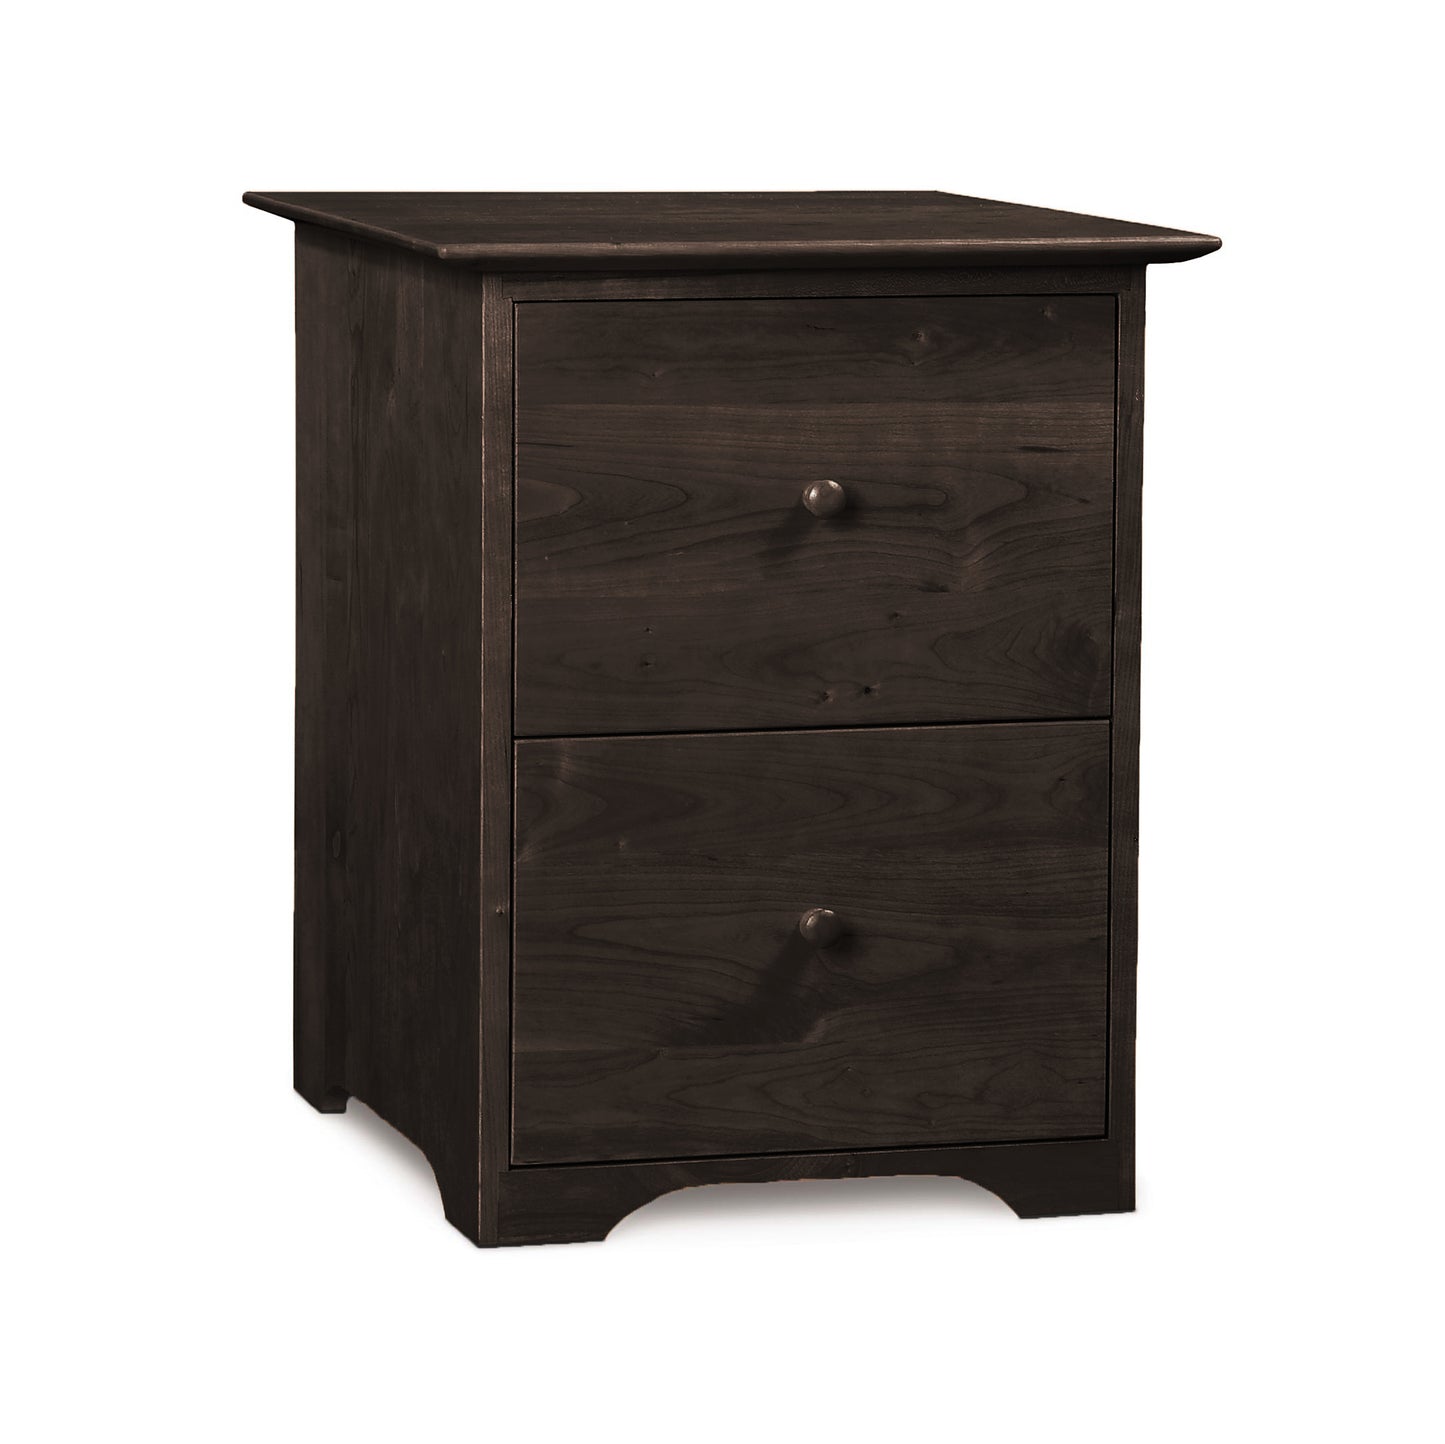 A Sarah Rolling Filing Cabinet, crafted from sustainably harvested woods, in a dark finish with round knobs on a white background by Copeland Furniture.